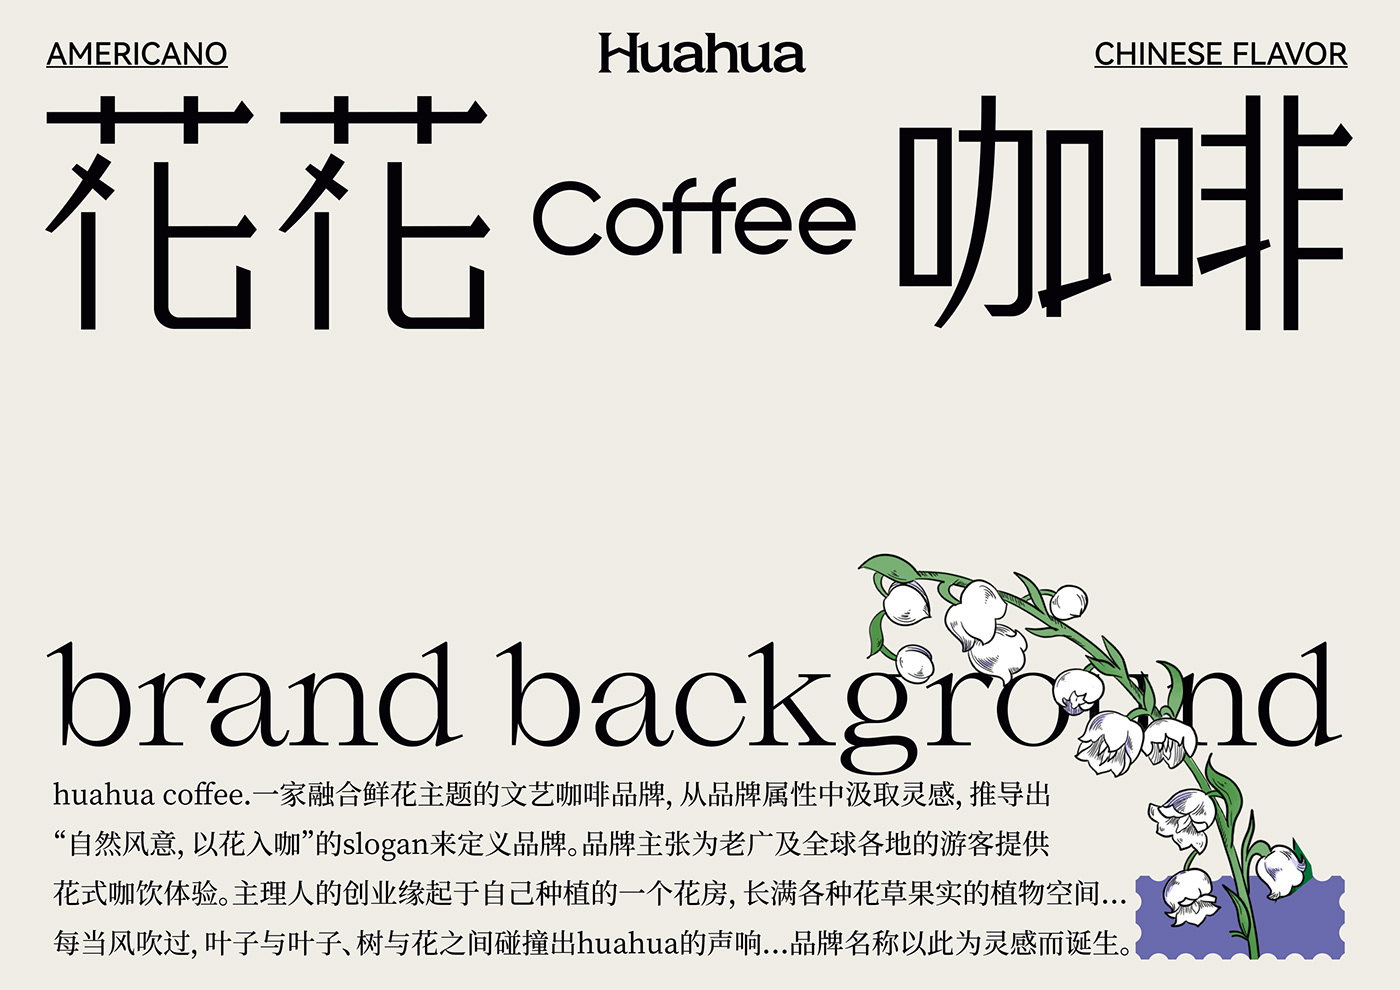 Packaging Coffee branding  visual identity band package graphic design  ILLUSTRATION  cafe